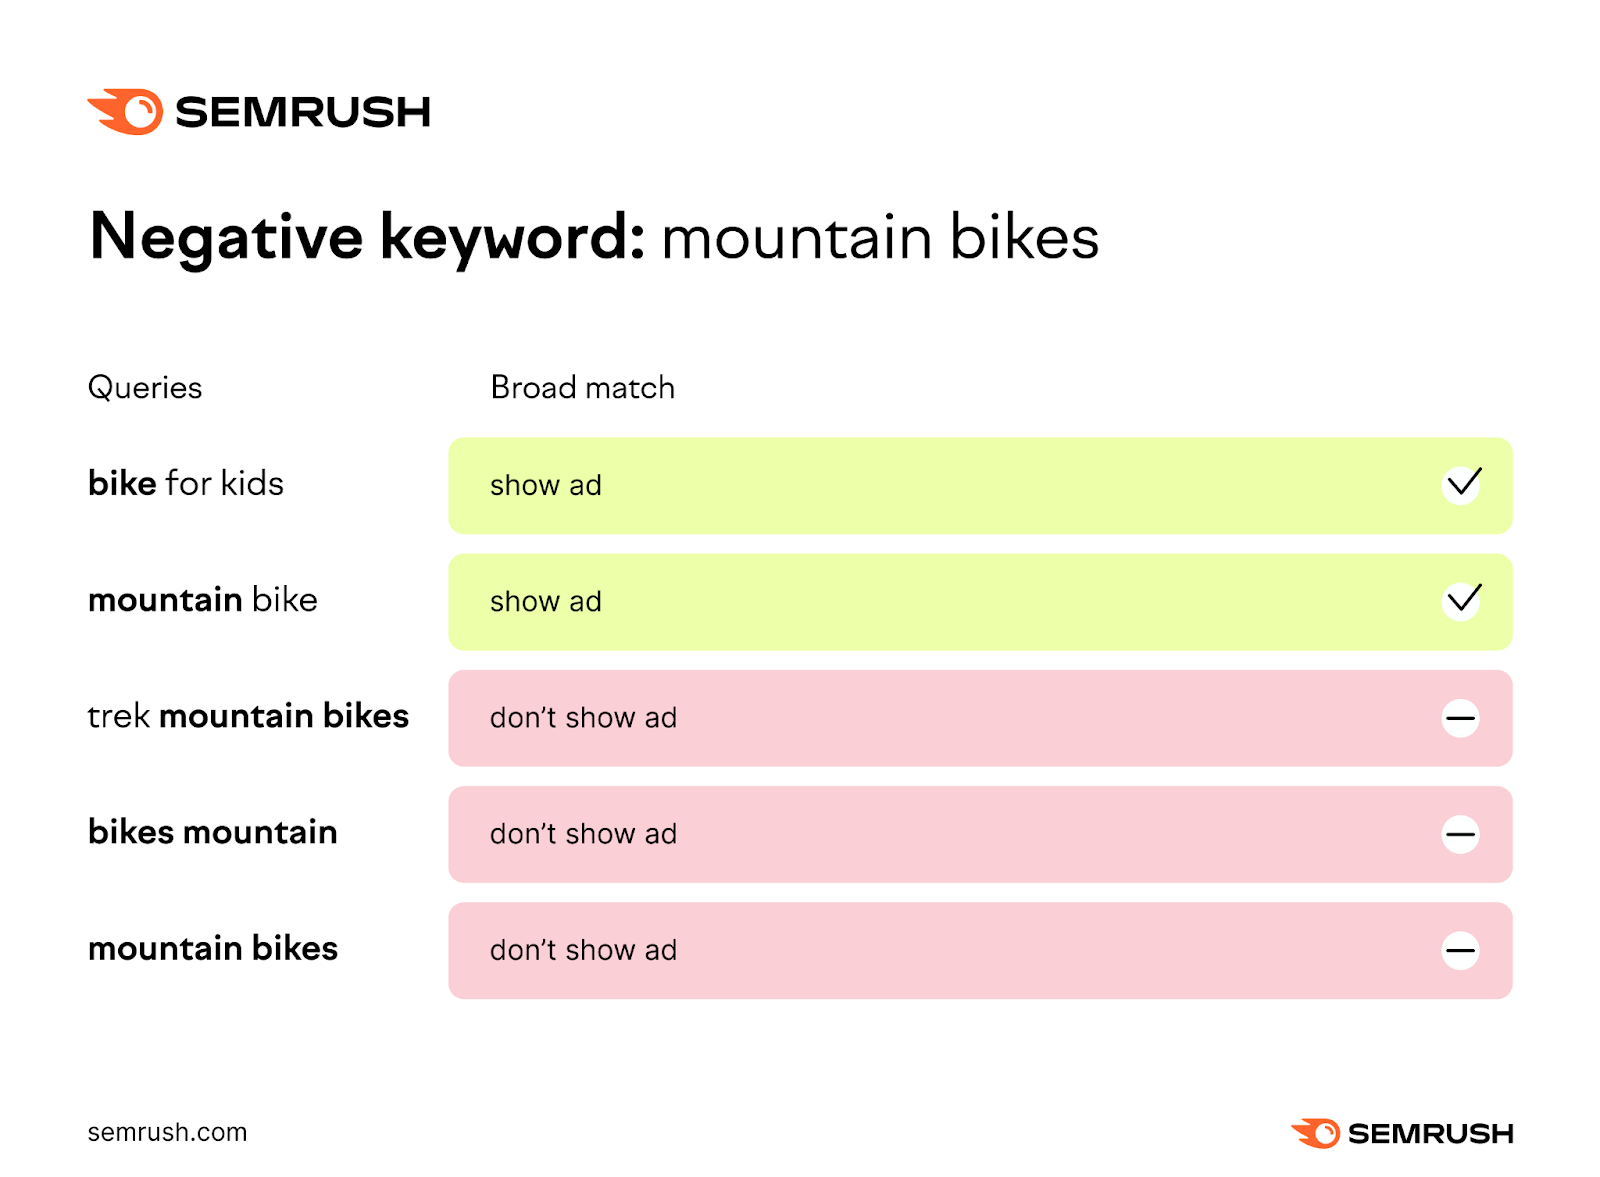 a visual example of "negative keyword: mountains" bike showing examples for different queries and broad matches